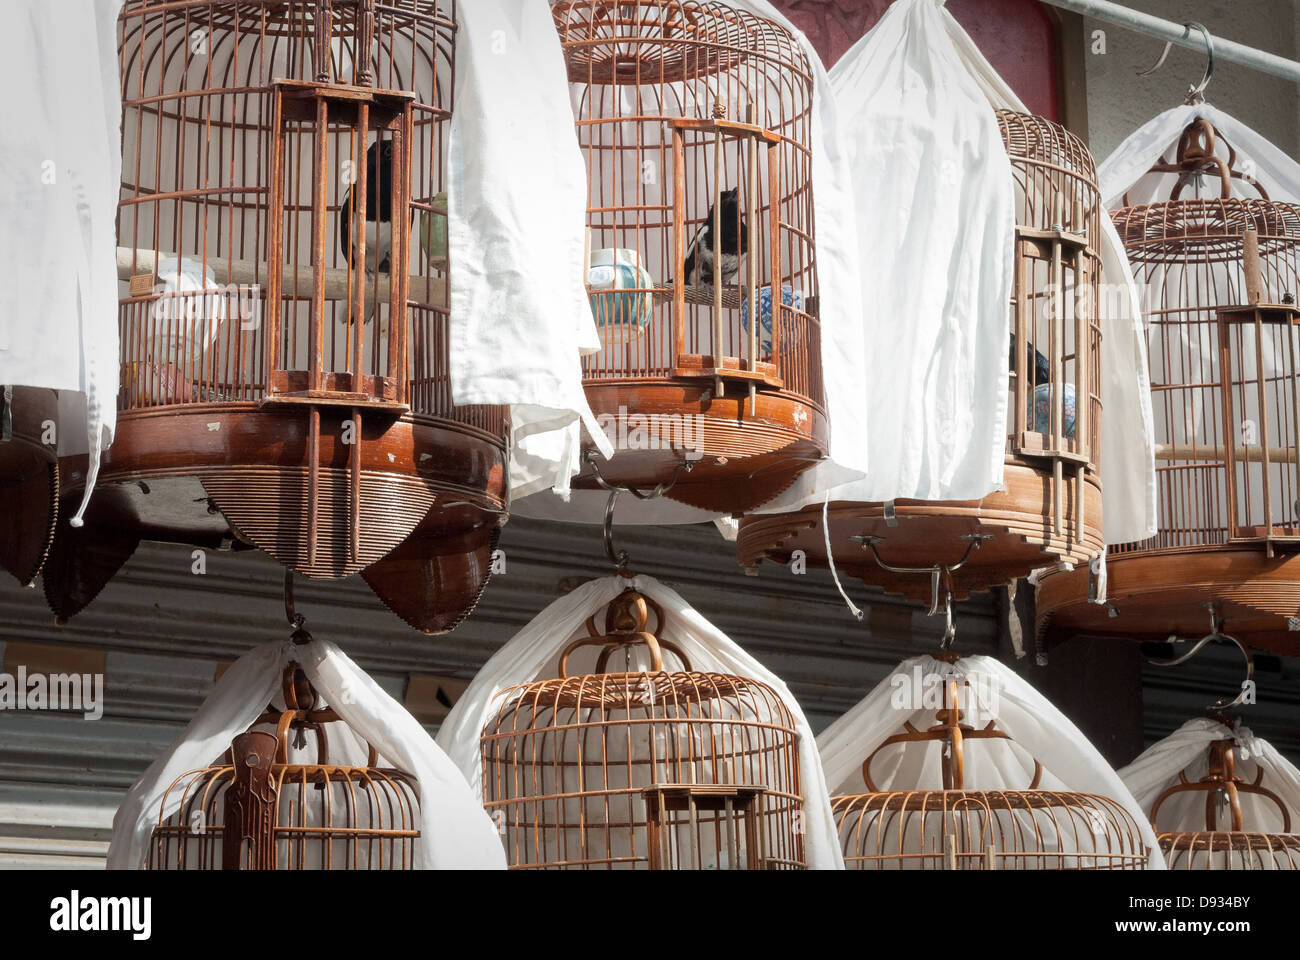 Birds in cages Stock Photo